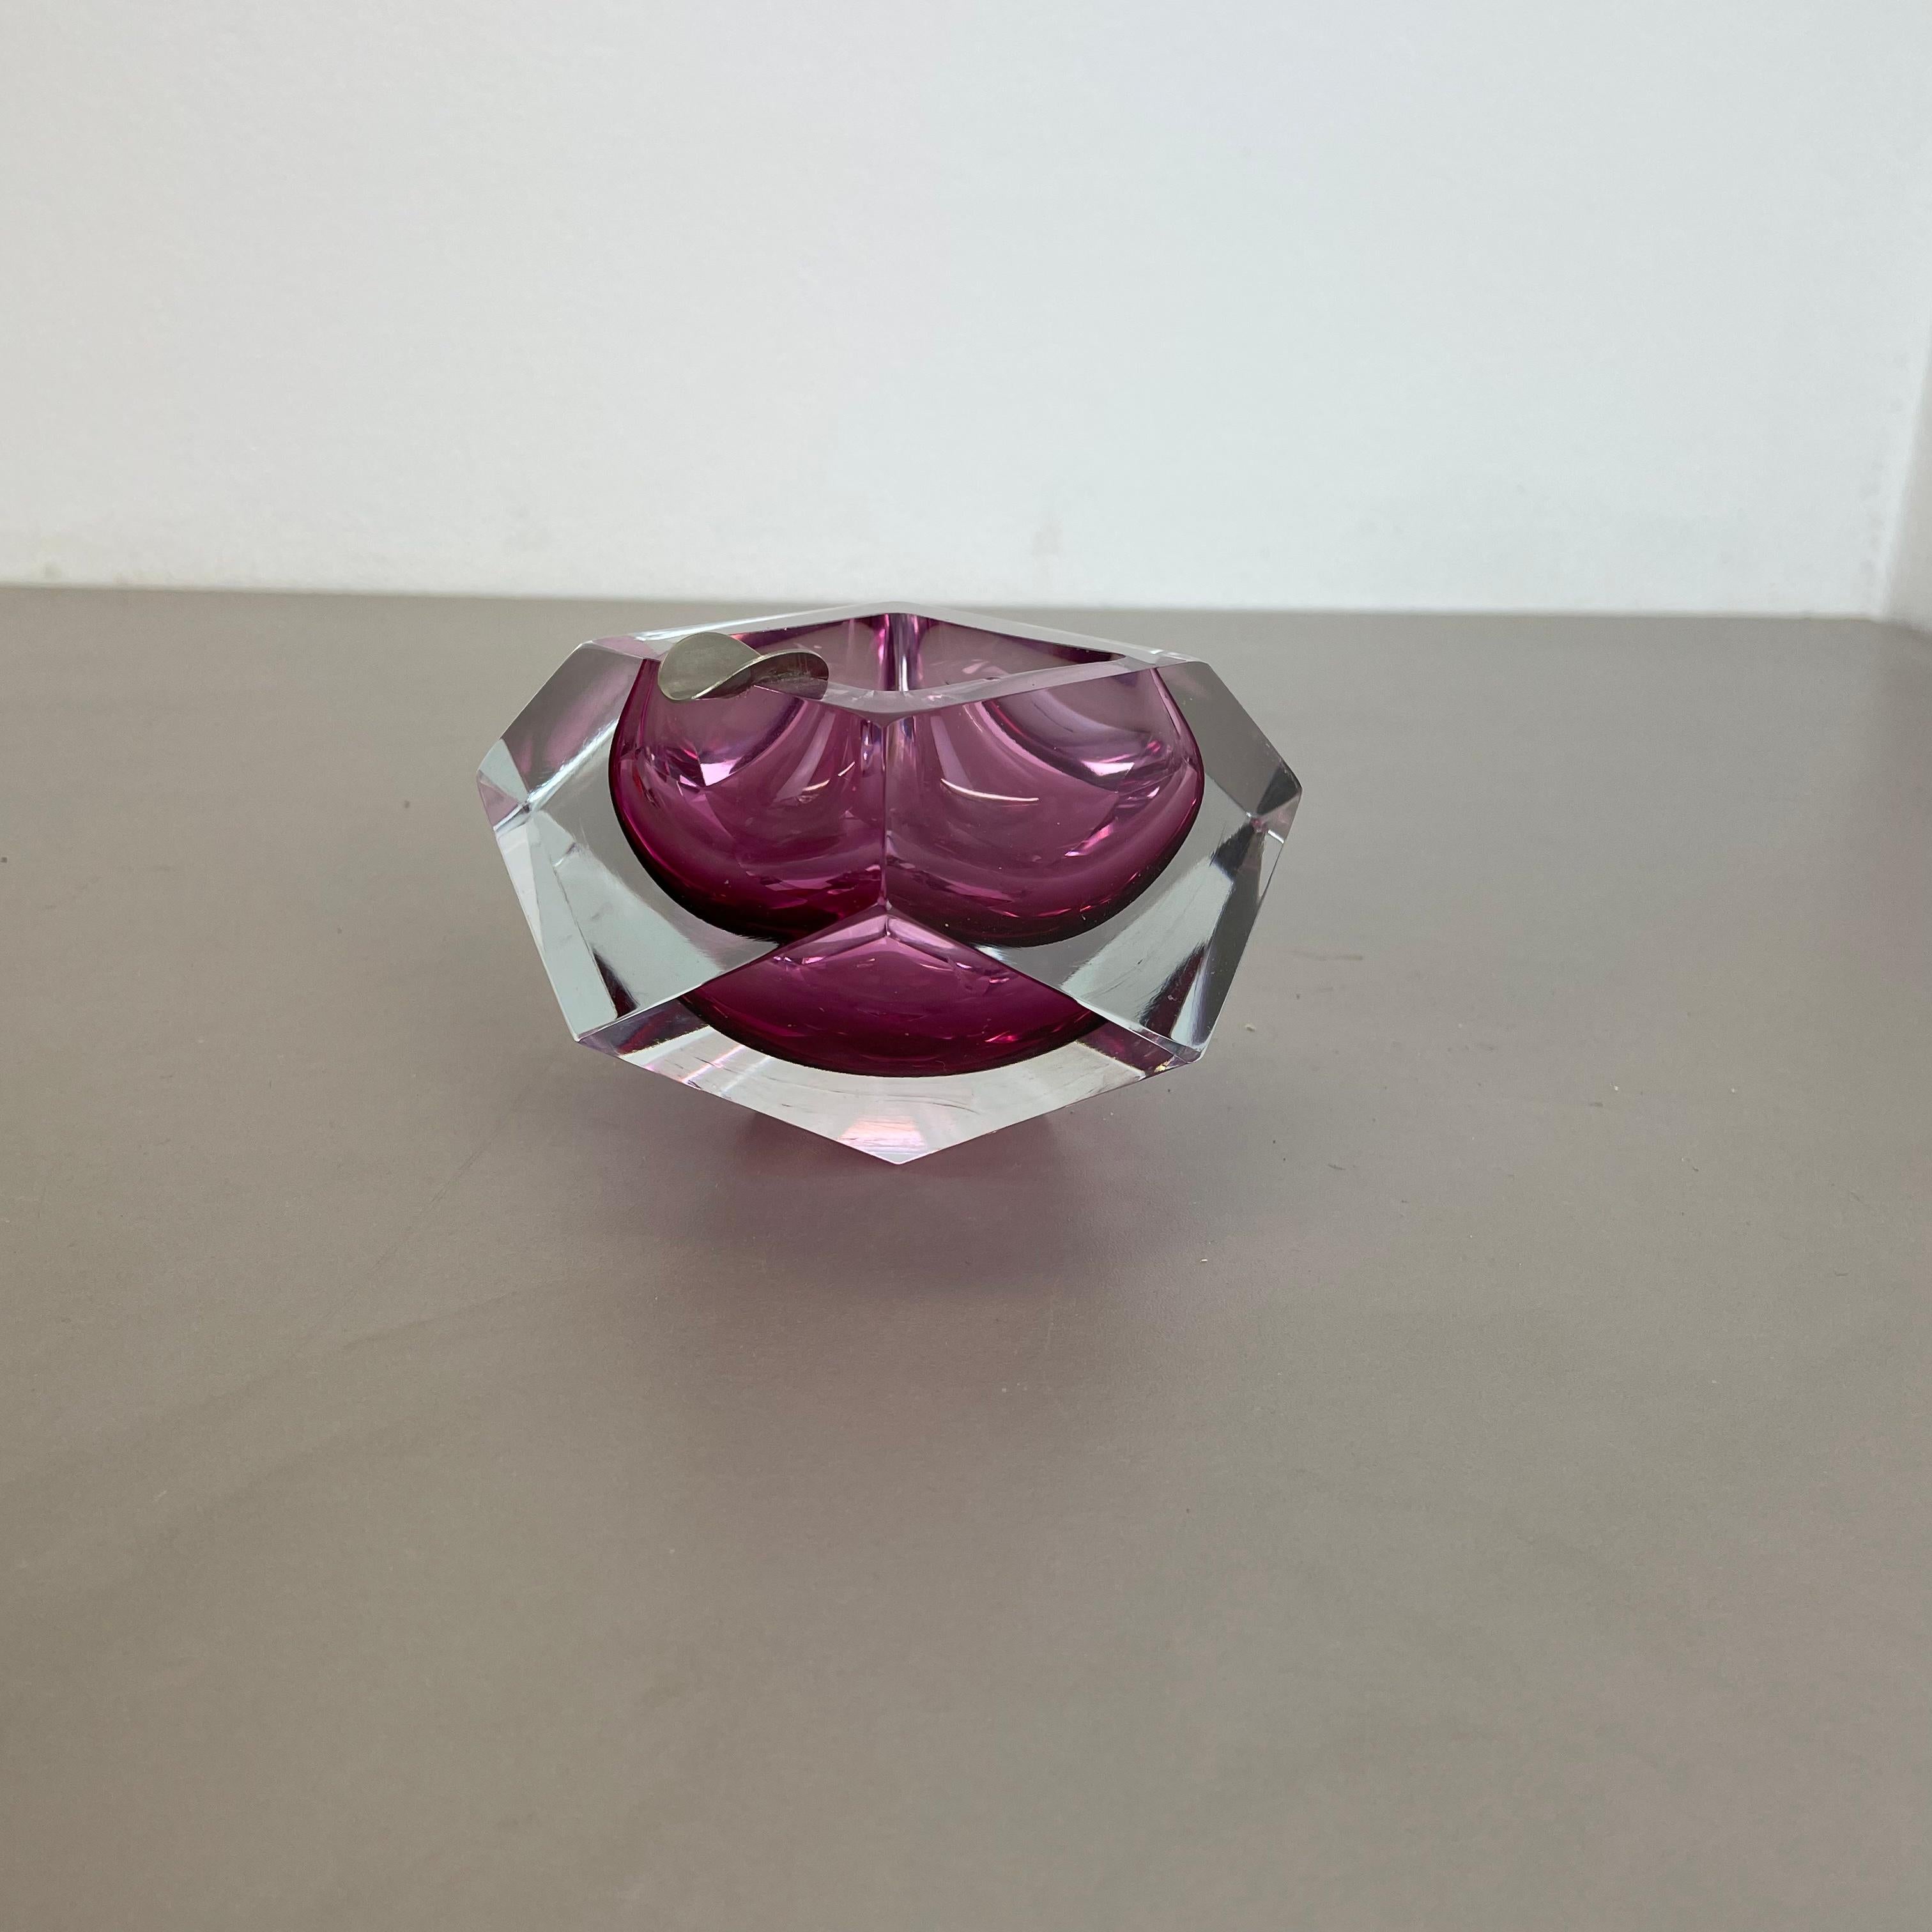 Mid-Century Modern Murano Glass Sommerso pink DIAMOND Bowl Ashtray by Flavio Poli, Italy, 1970s For Sale